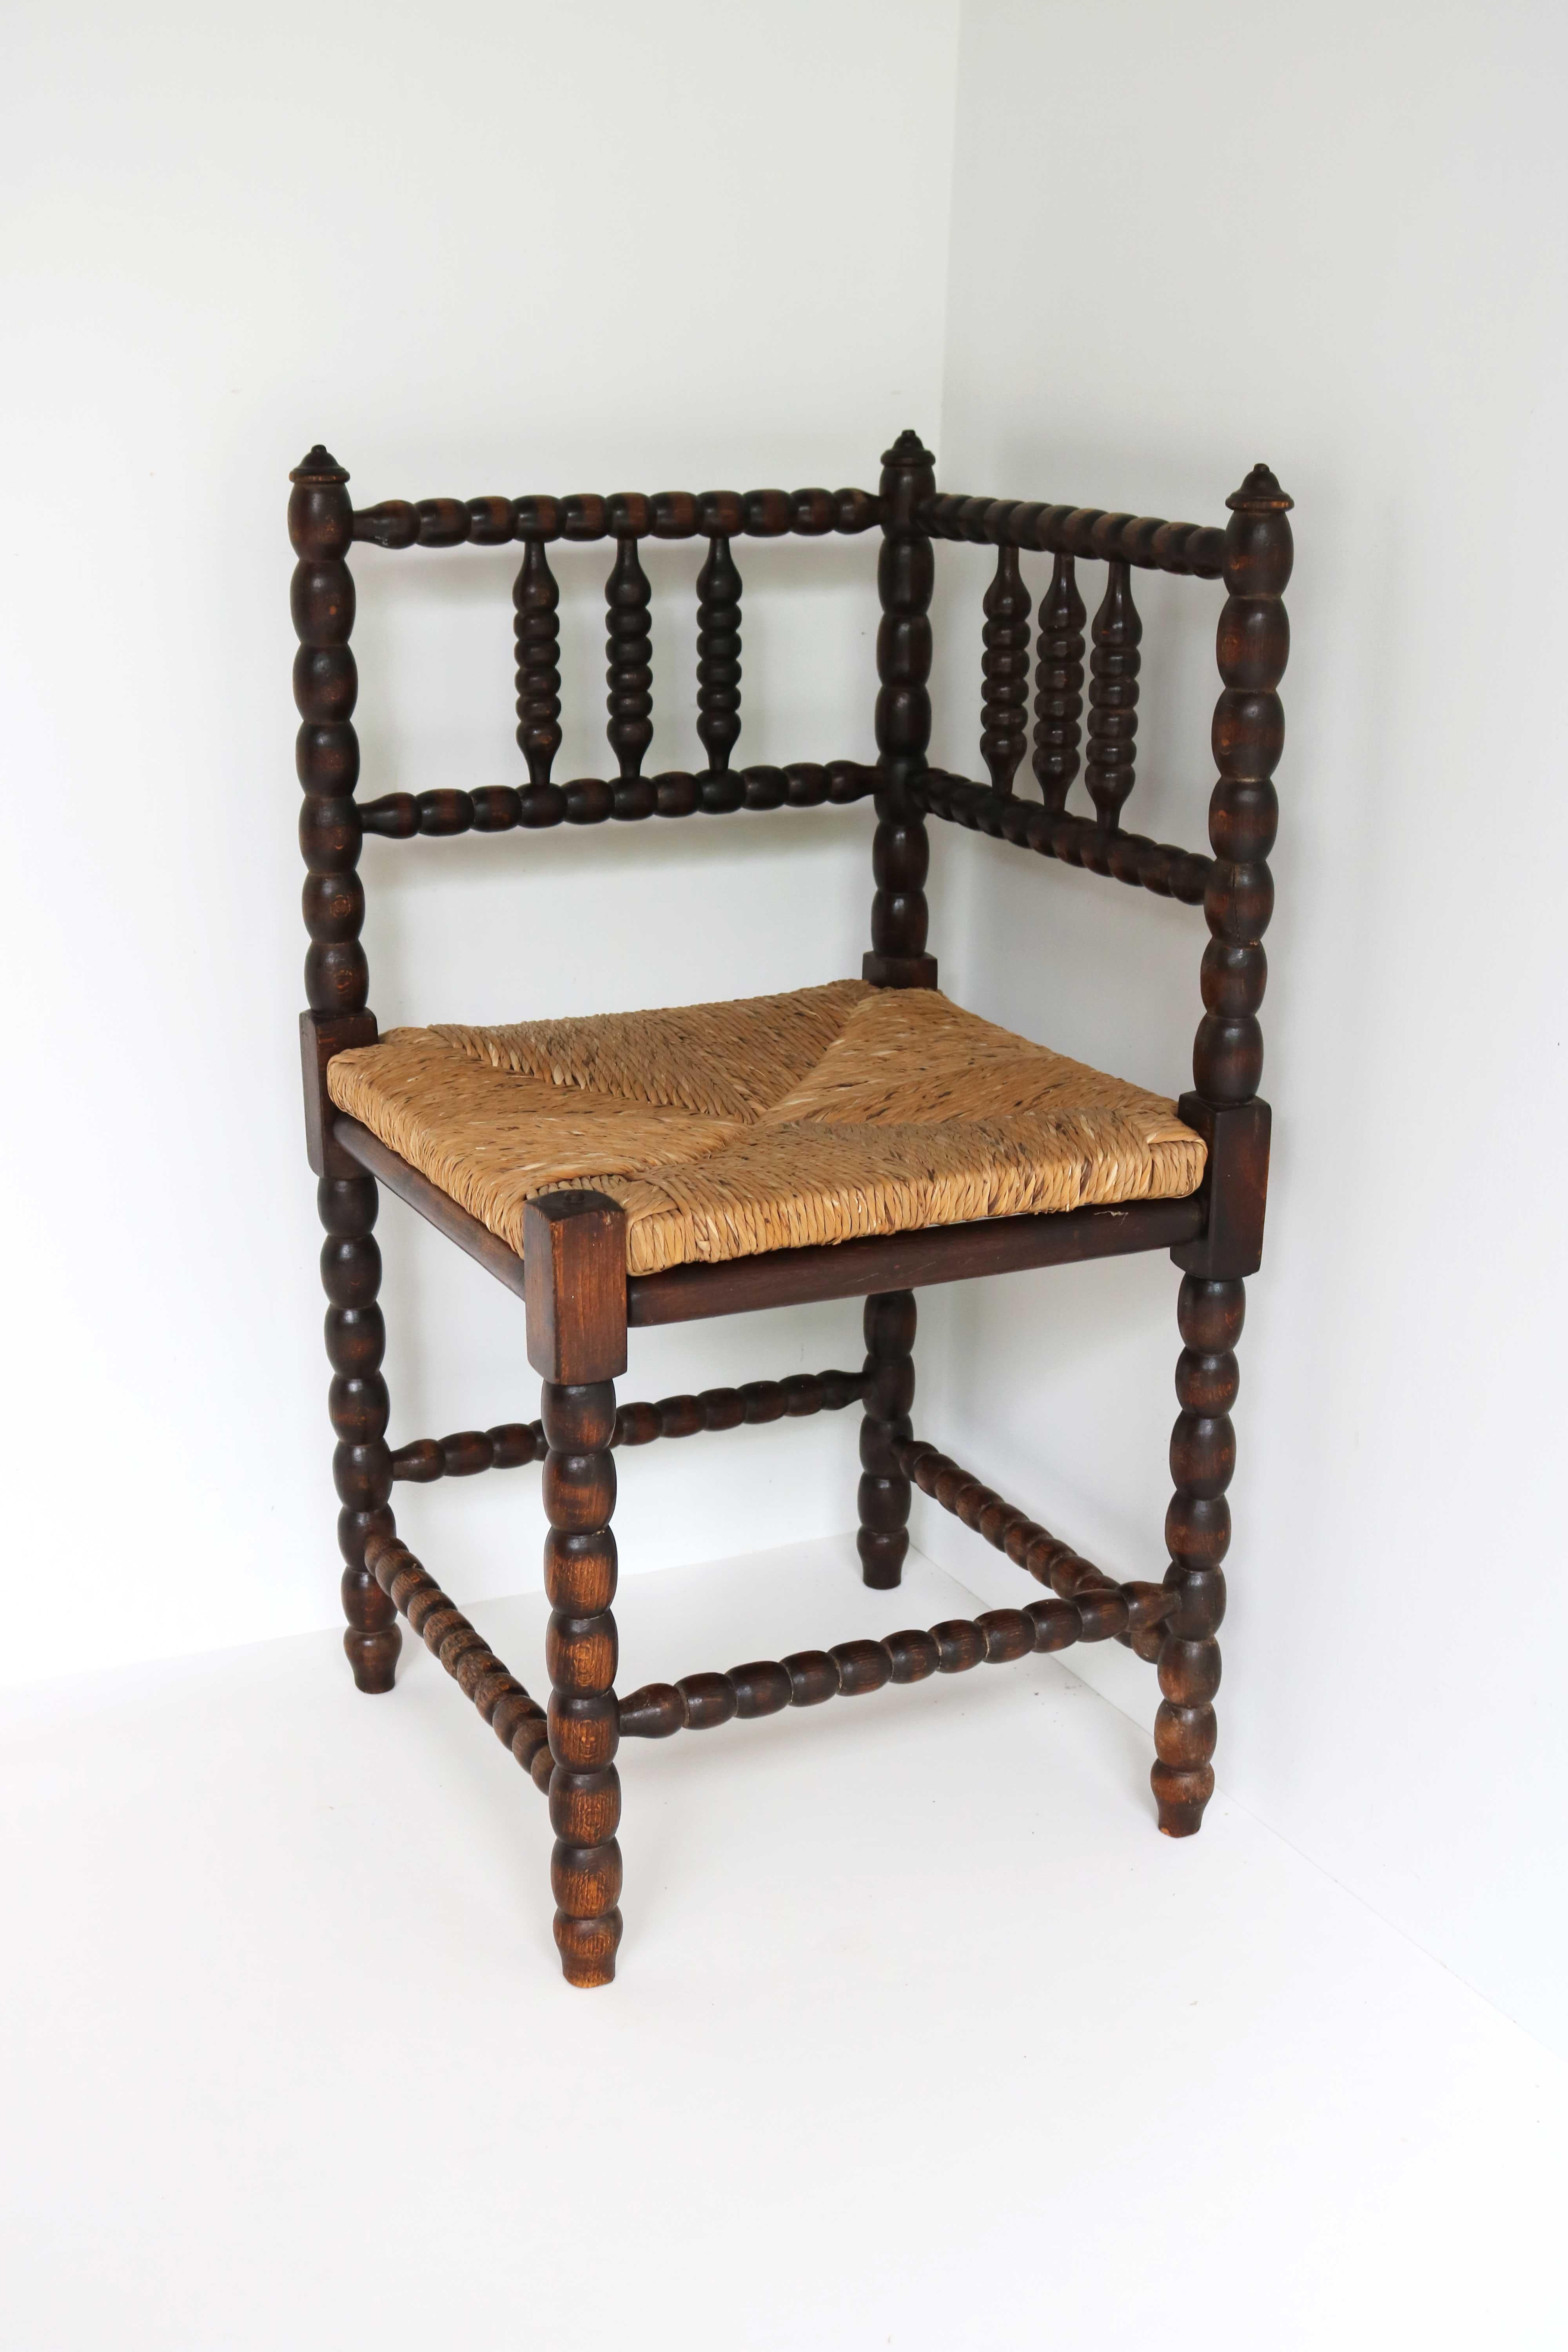 Country Antique Dutch Ruch-Seat Oak Corner Bobbin Chair Turned Hand Crafted 1900 For Sale